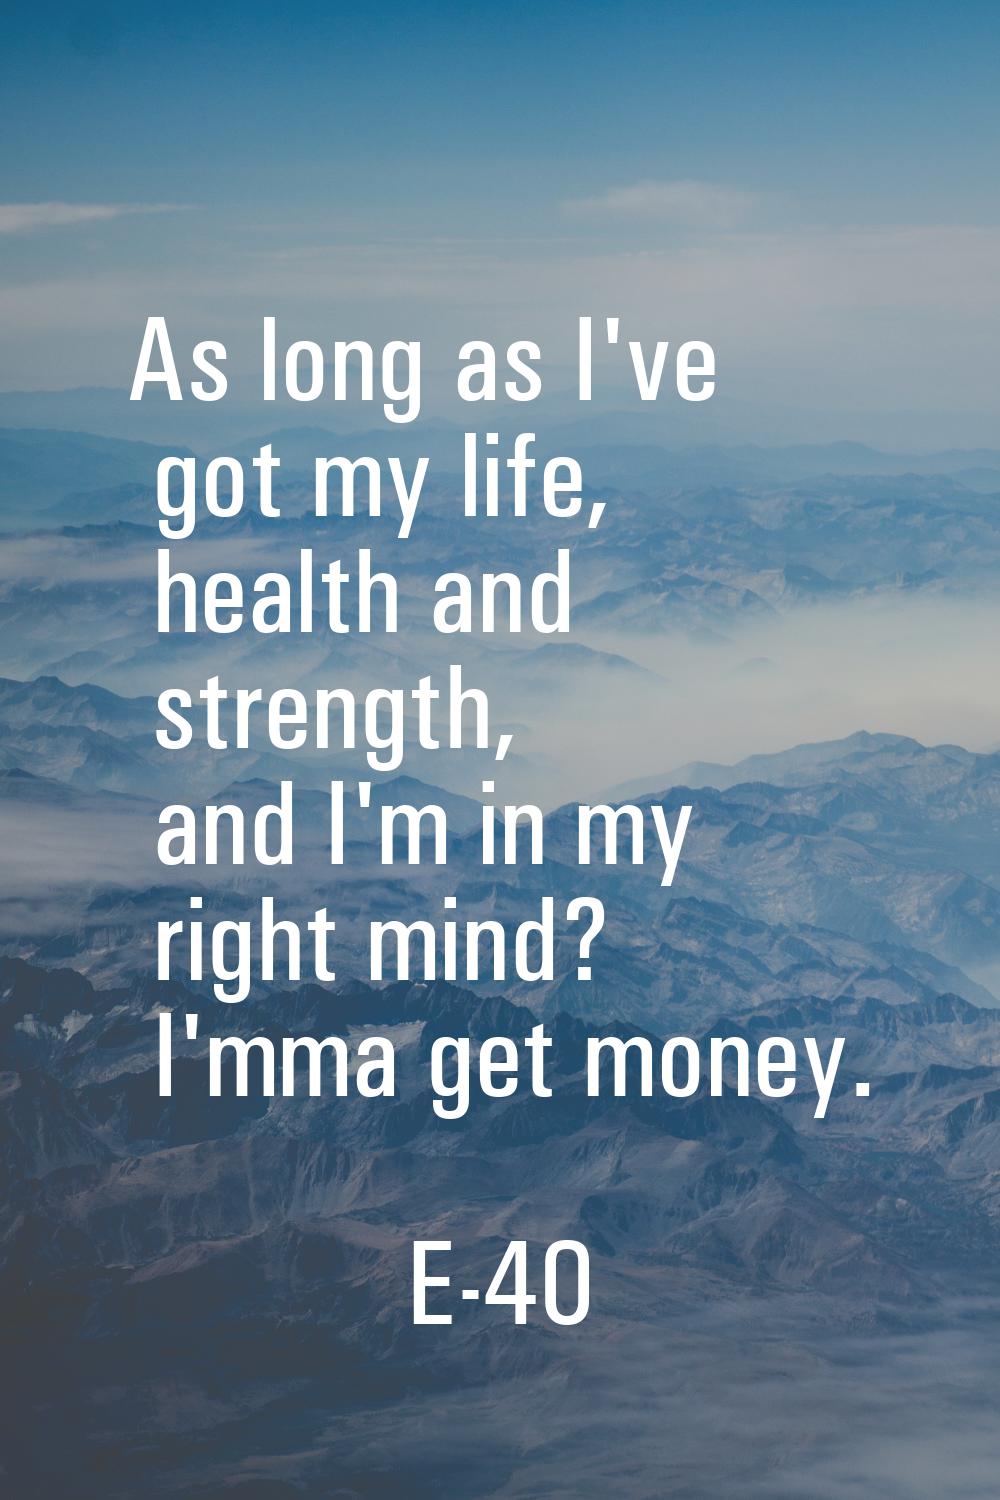 As long as I've got my life, health and strength, and I'm in my right mind? I'mma get money.